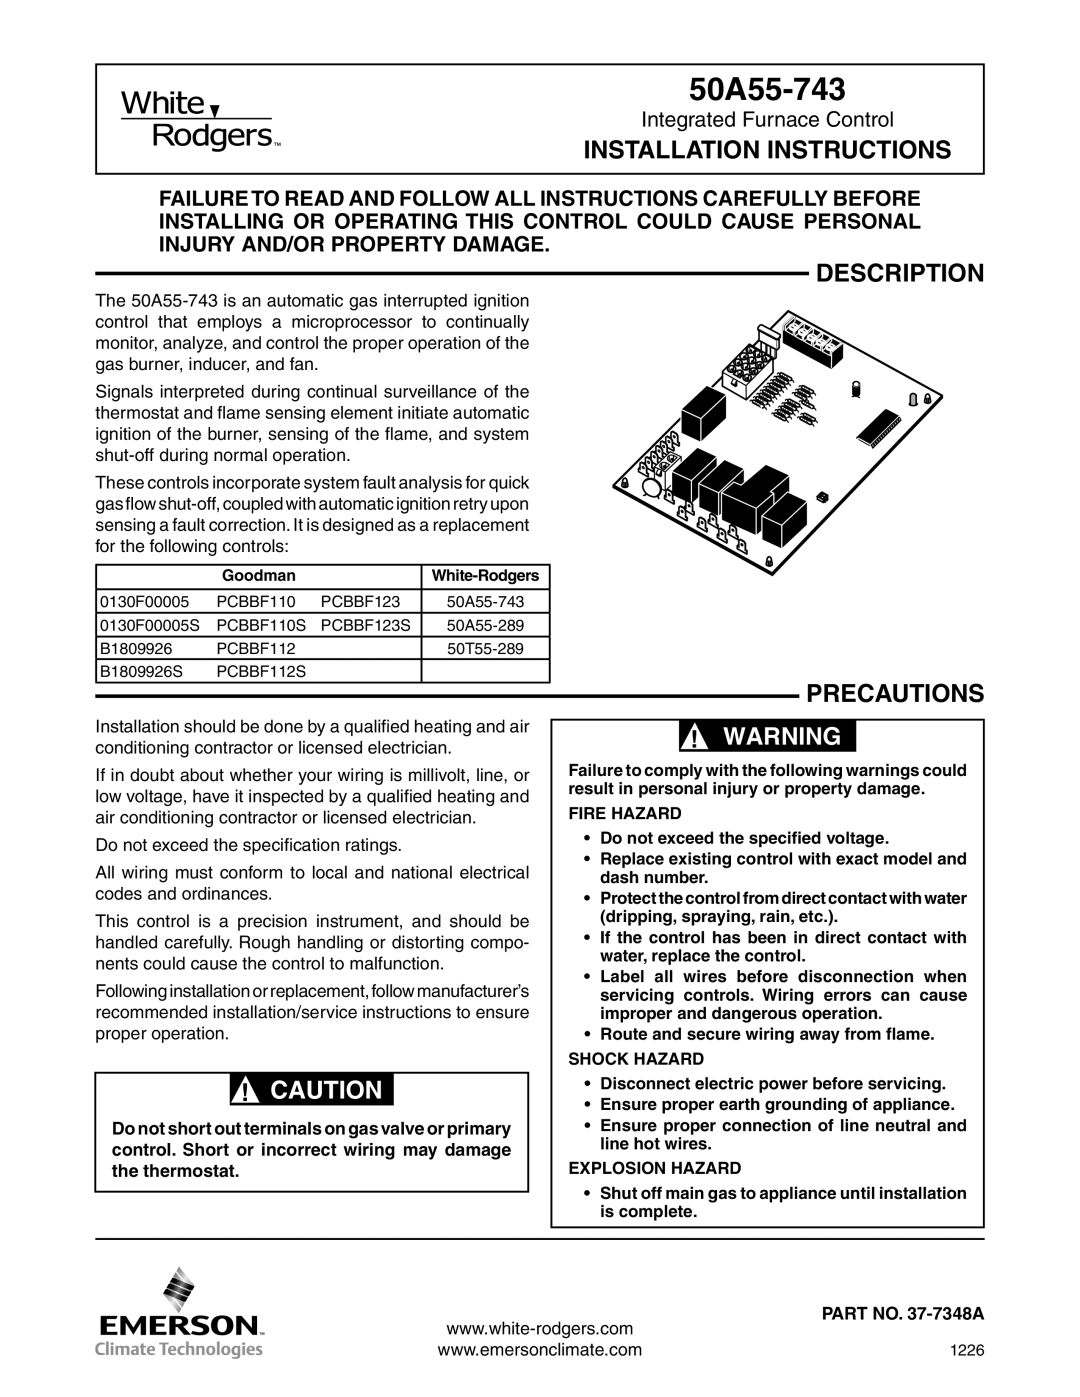 White Rodgers 50A55-743 installation instructions Installation Instructions, Description, Precautions 